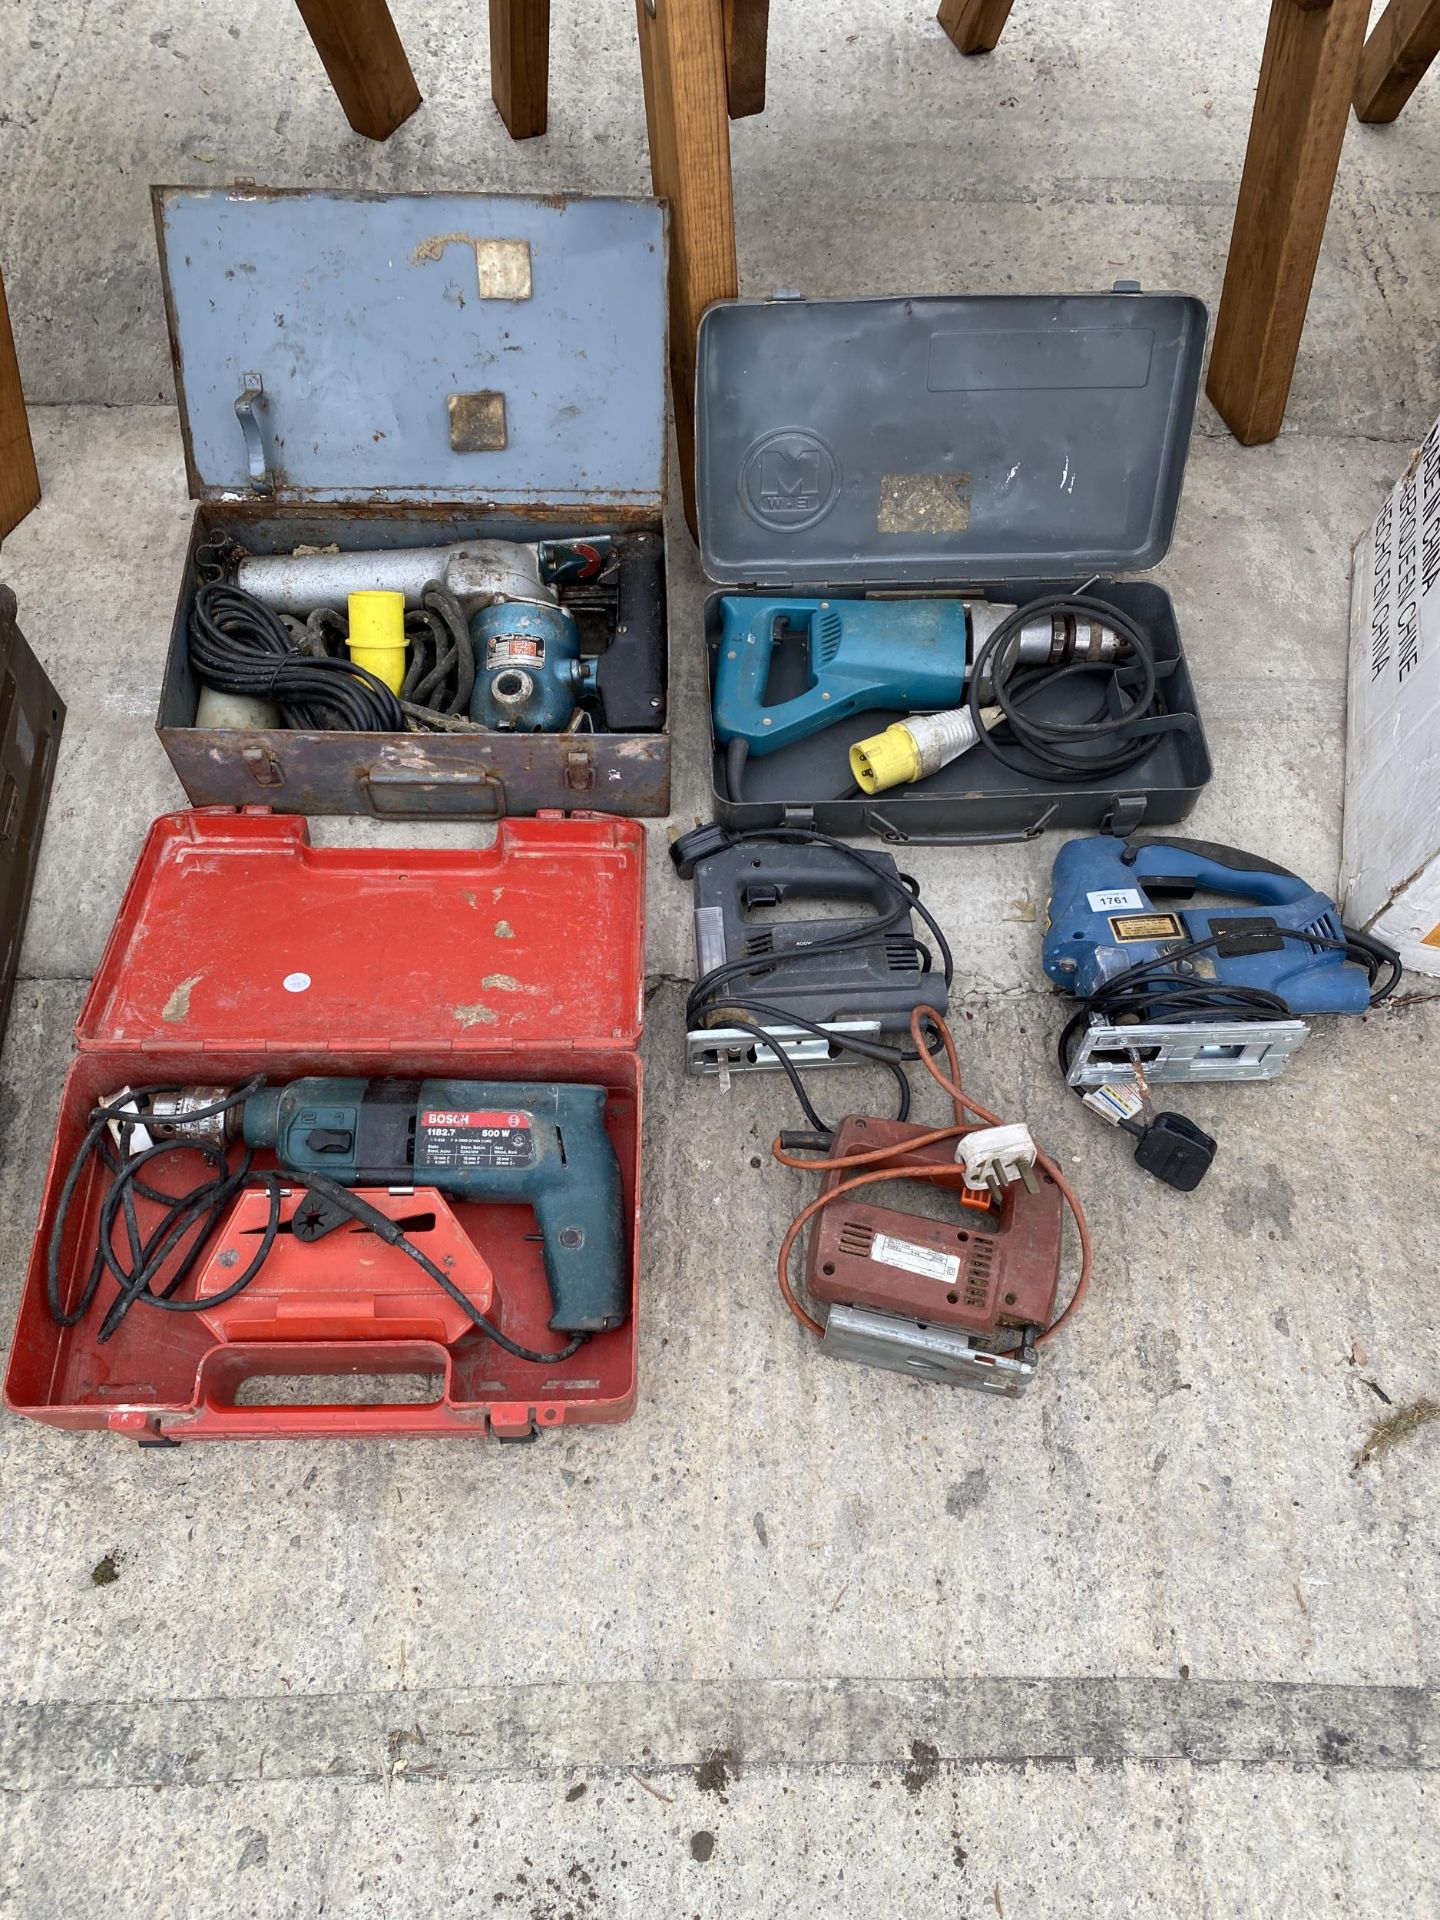 SIX VARIOUS POWER TOOLS TO INCLUDE A BOSCH DRILL, JIGSAWS, ETC